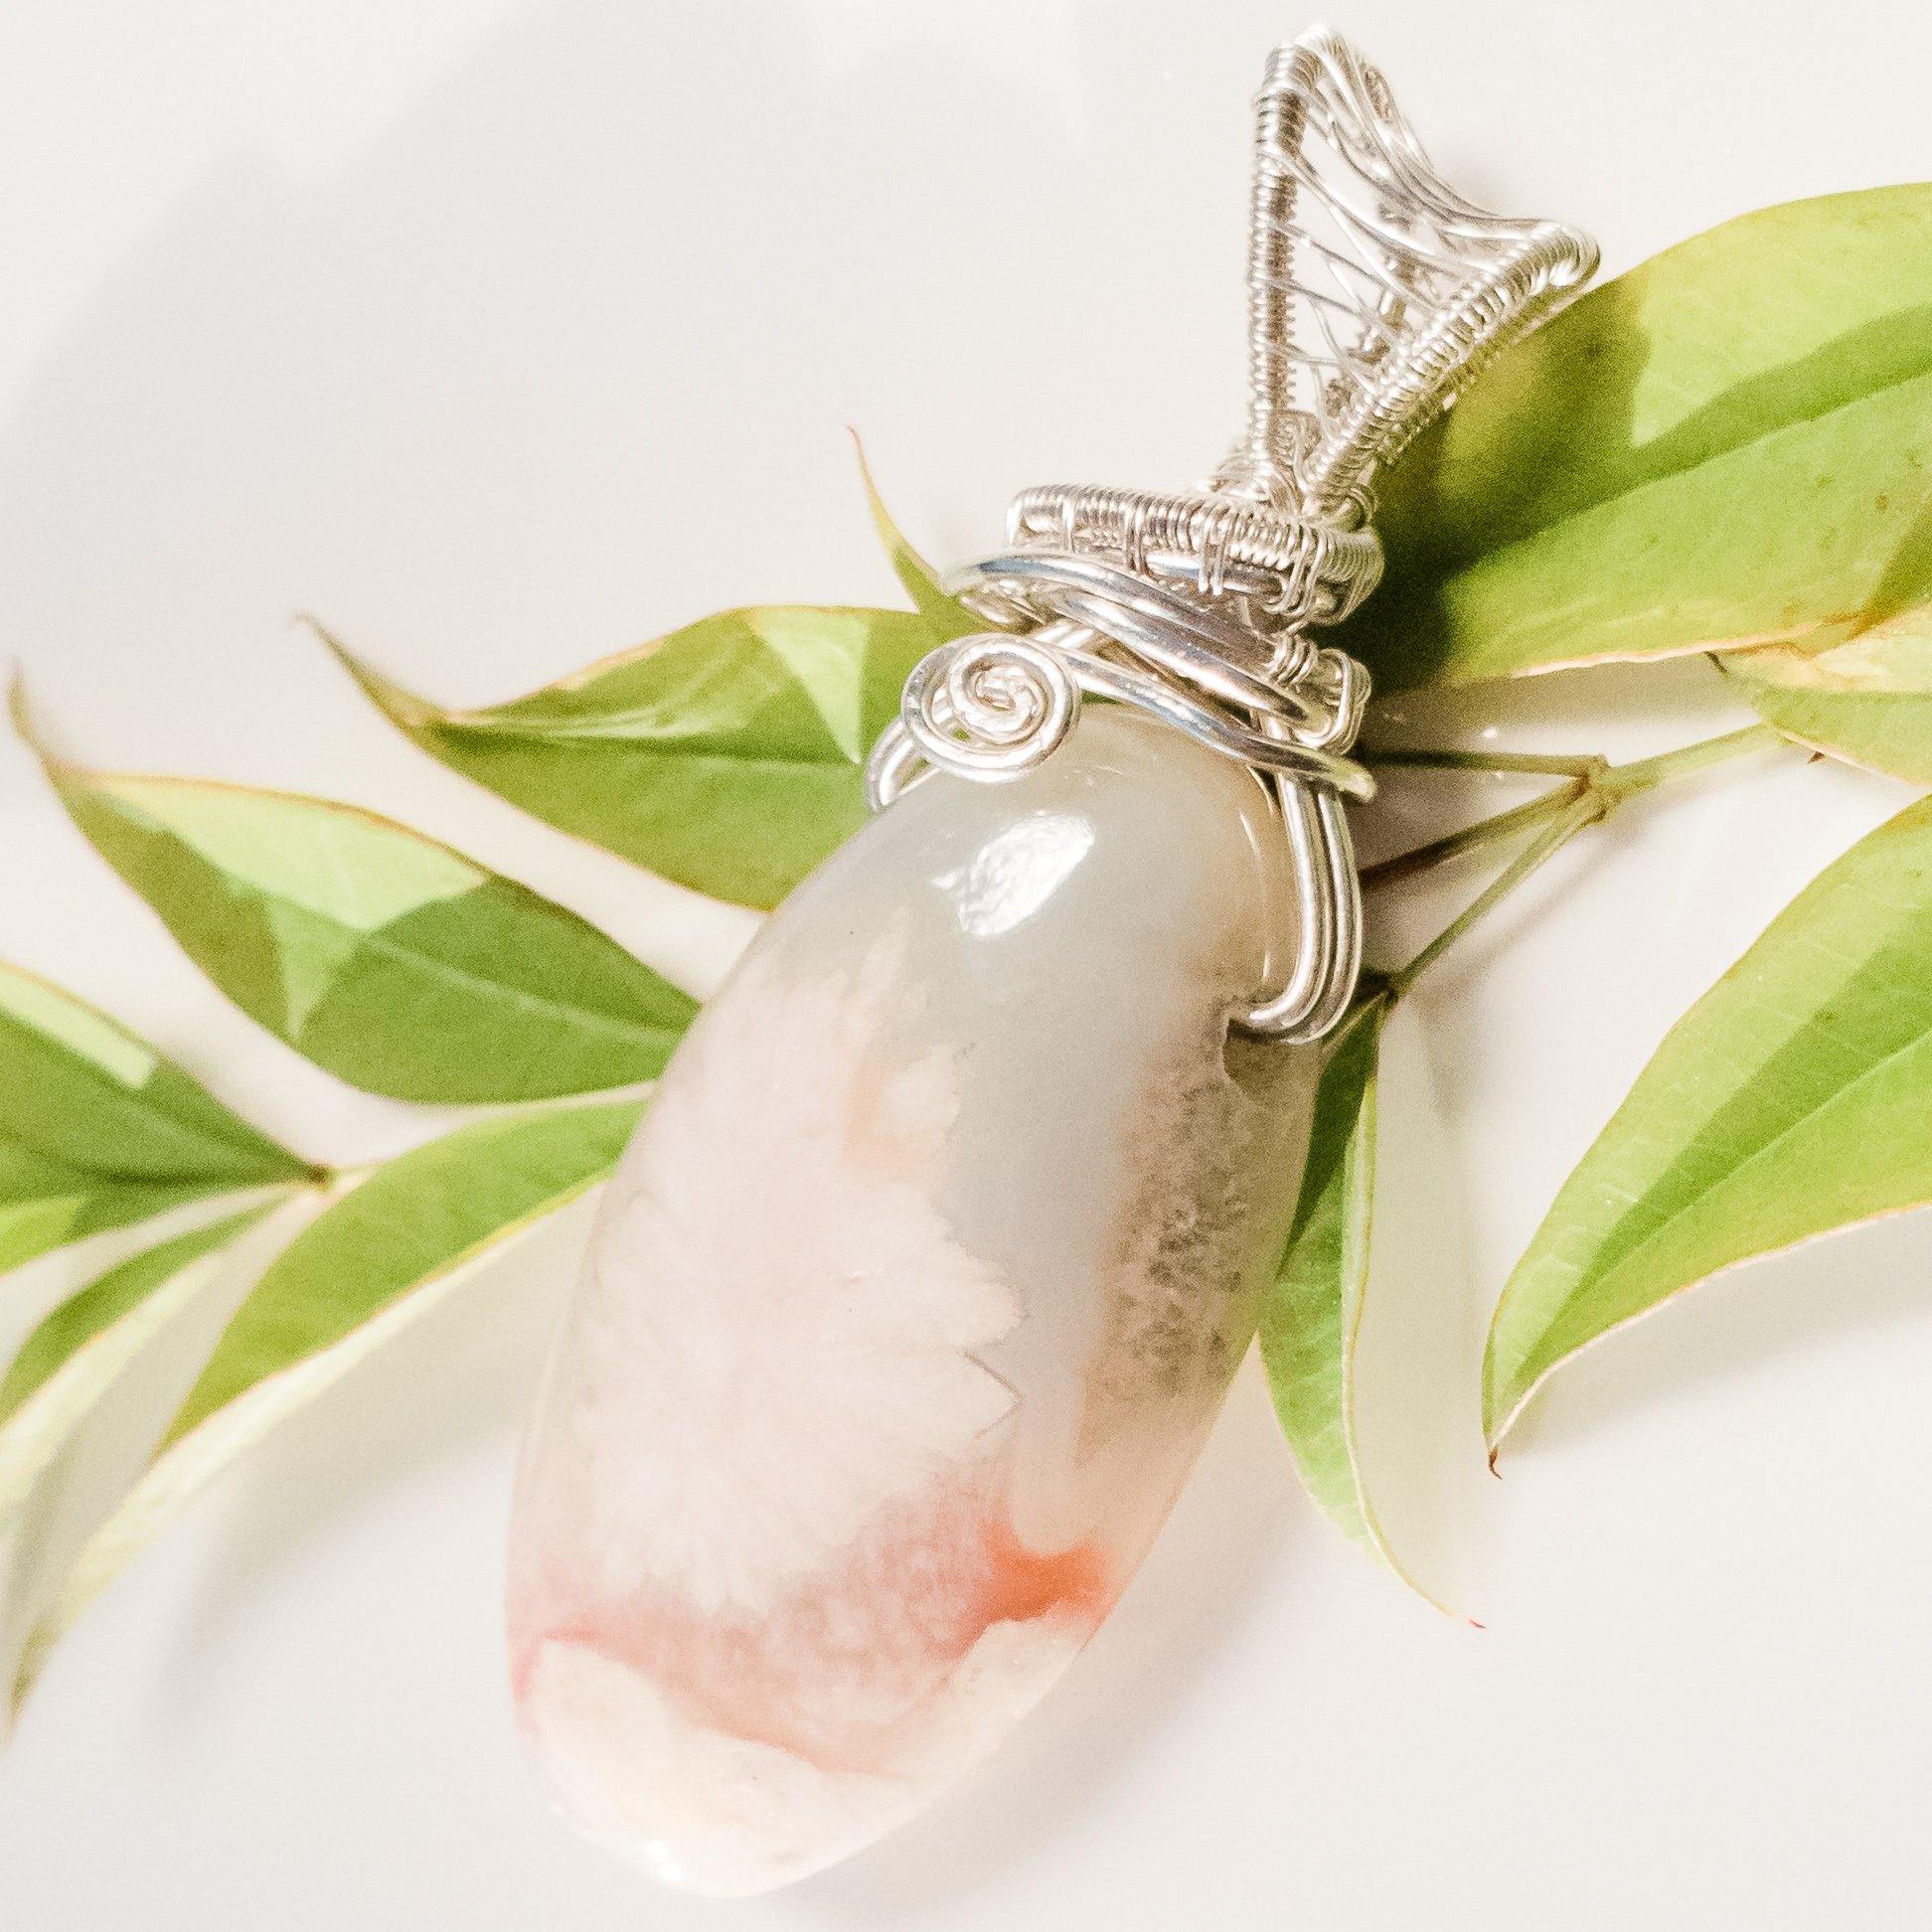 Beautiful Cherry Blossom Agate Pendant in Silver front side view - BellaChel Jeweler